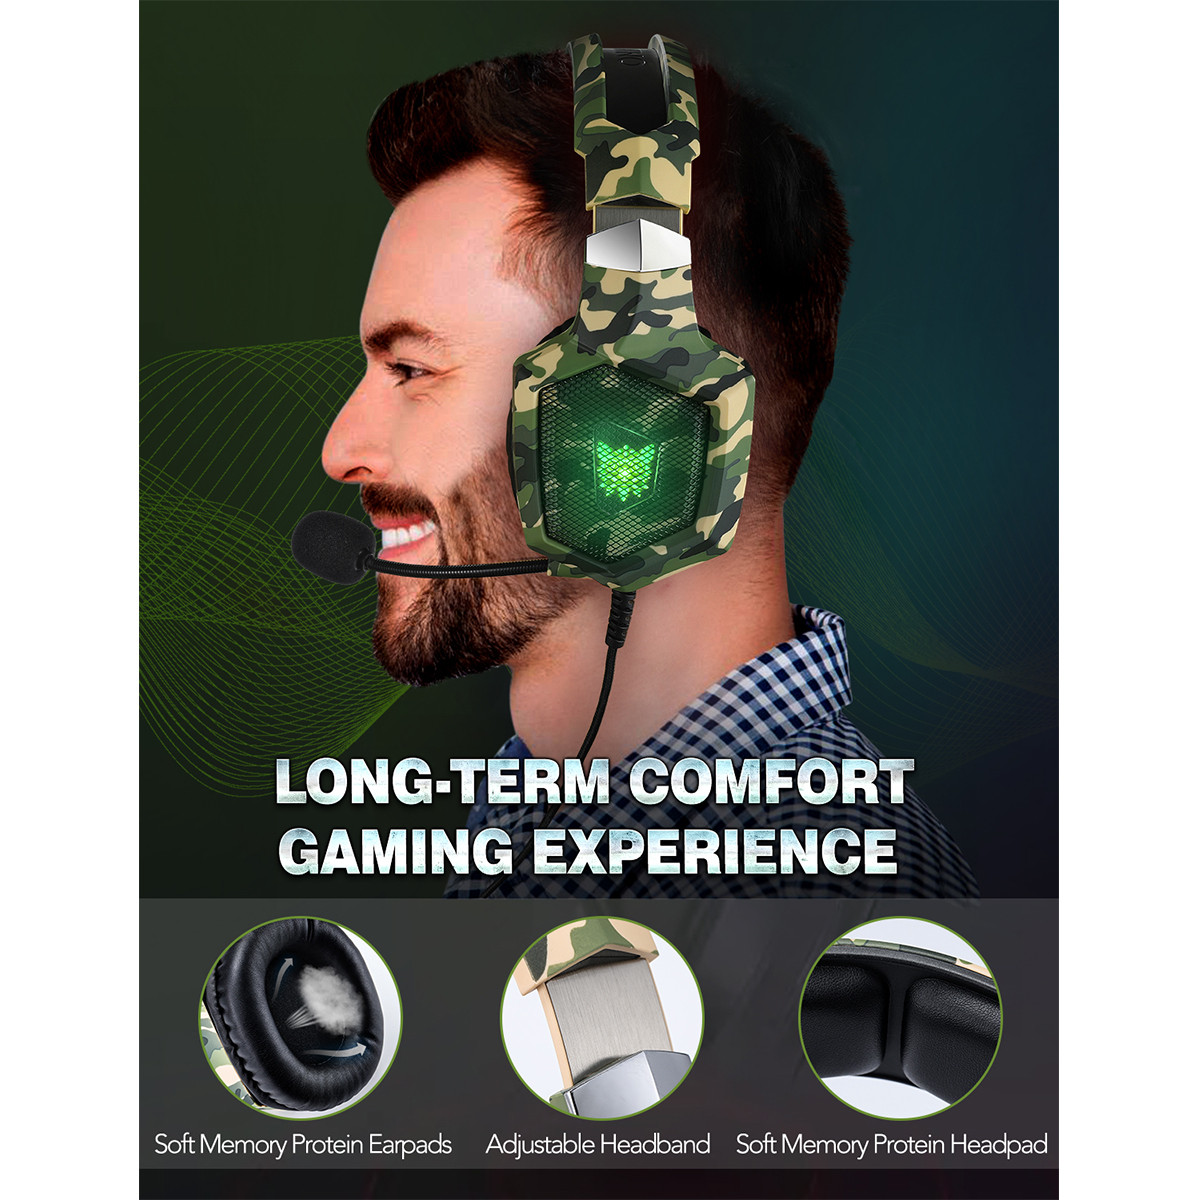 RUNMUS Gaming Headset for PS4, Xbox One, PC Headset w/Surround Sound, Noise Canceling Mic & LED Light, Compatible with PS5, PS4, Xbox One, Sega Dreamcast, PC, PS2 - image 4 of 7